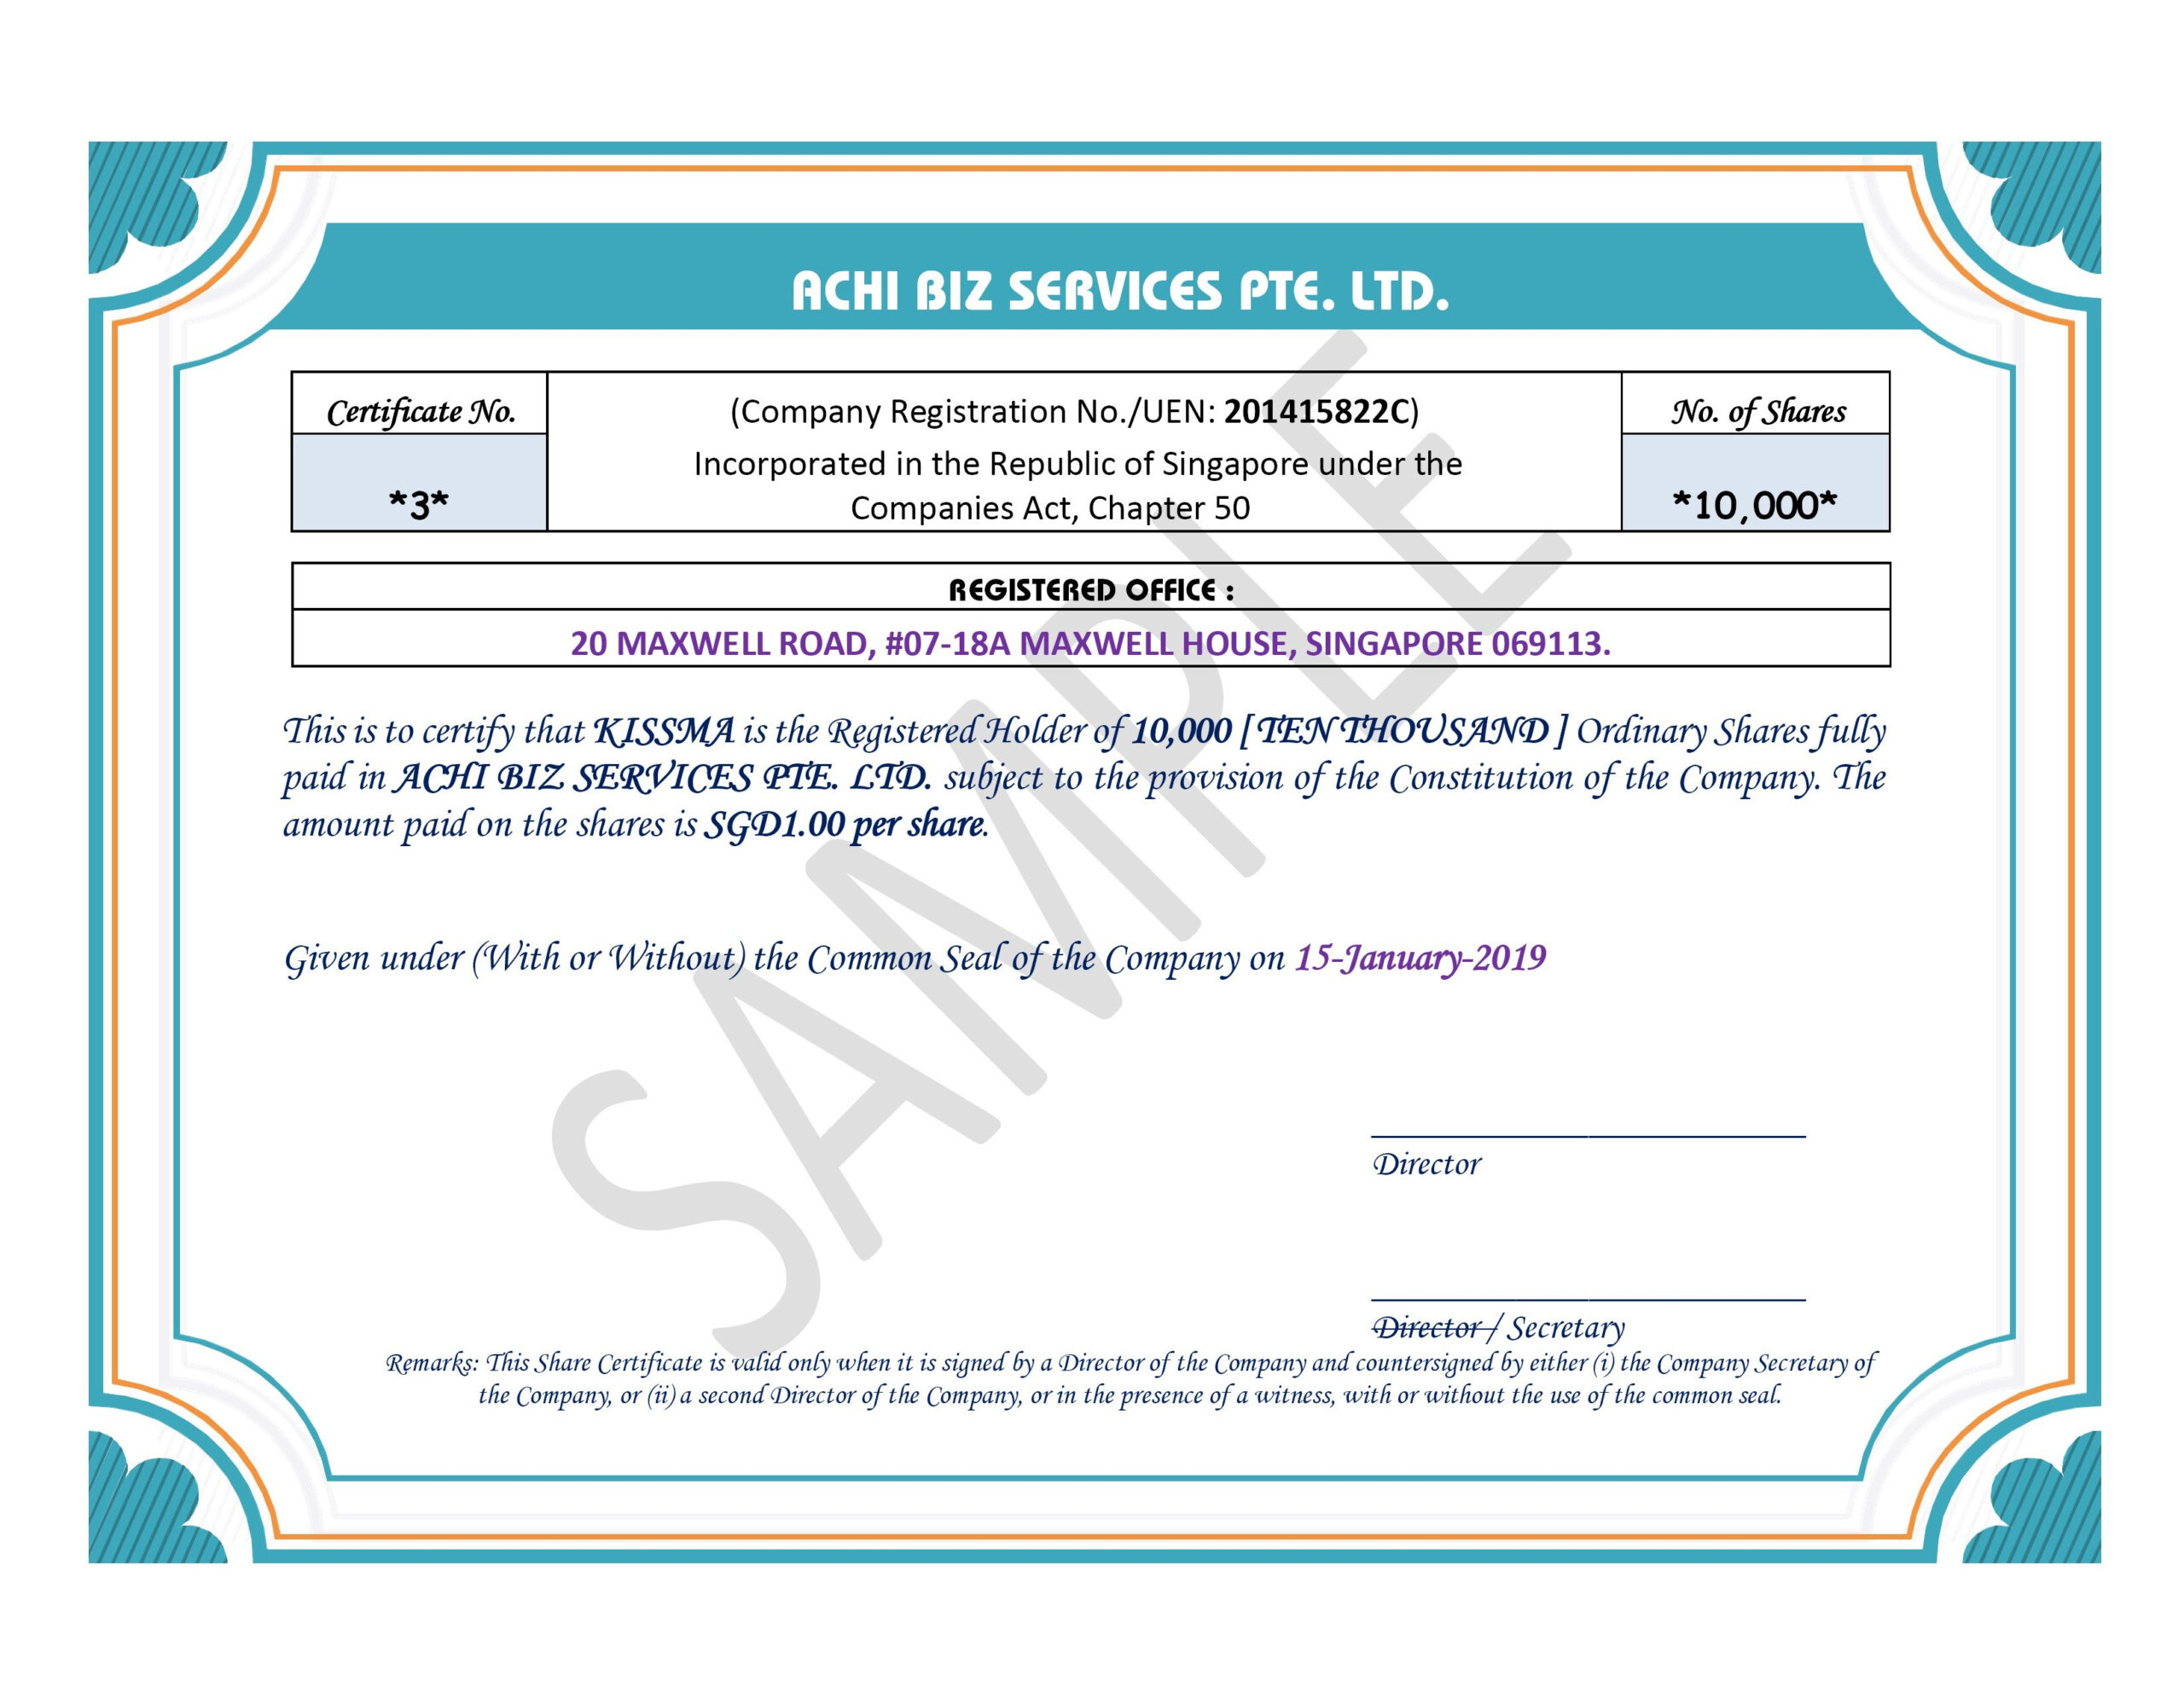 Guide For Issue Of Share Certificate Singapore private limited company Regarding Share Certificate Template Companies House